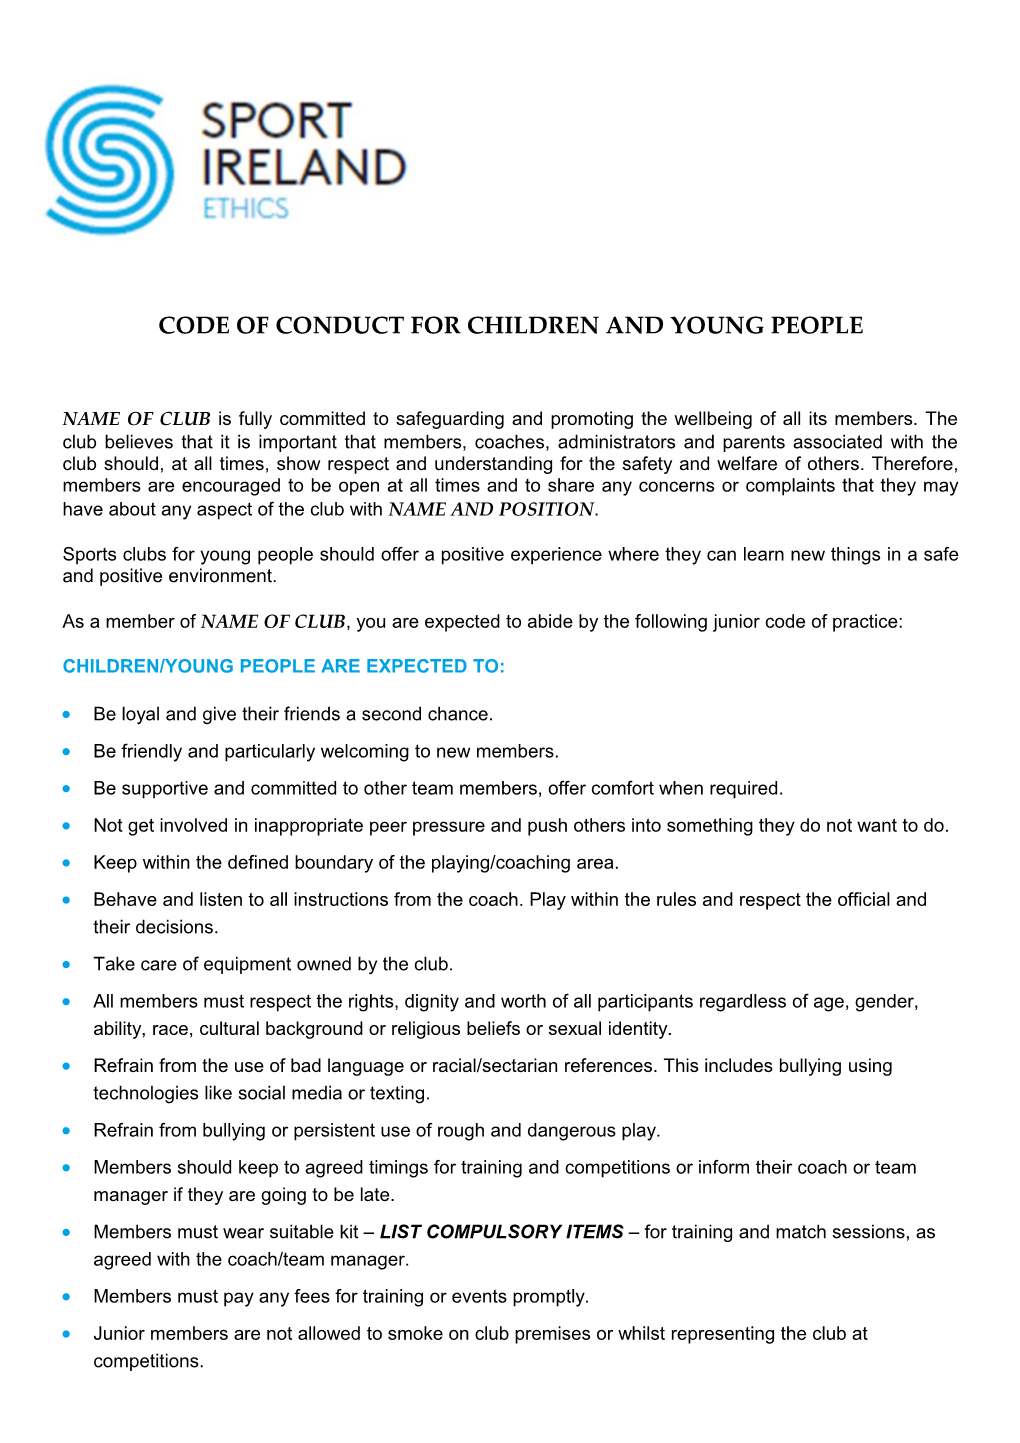 Code of Conduct for Children and Young People